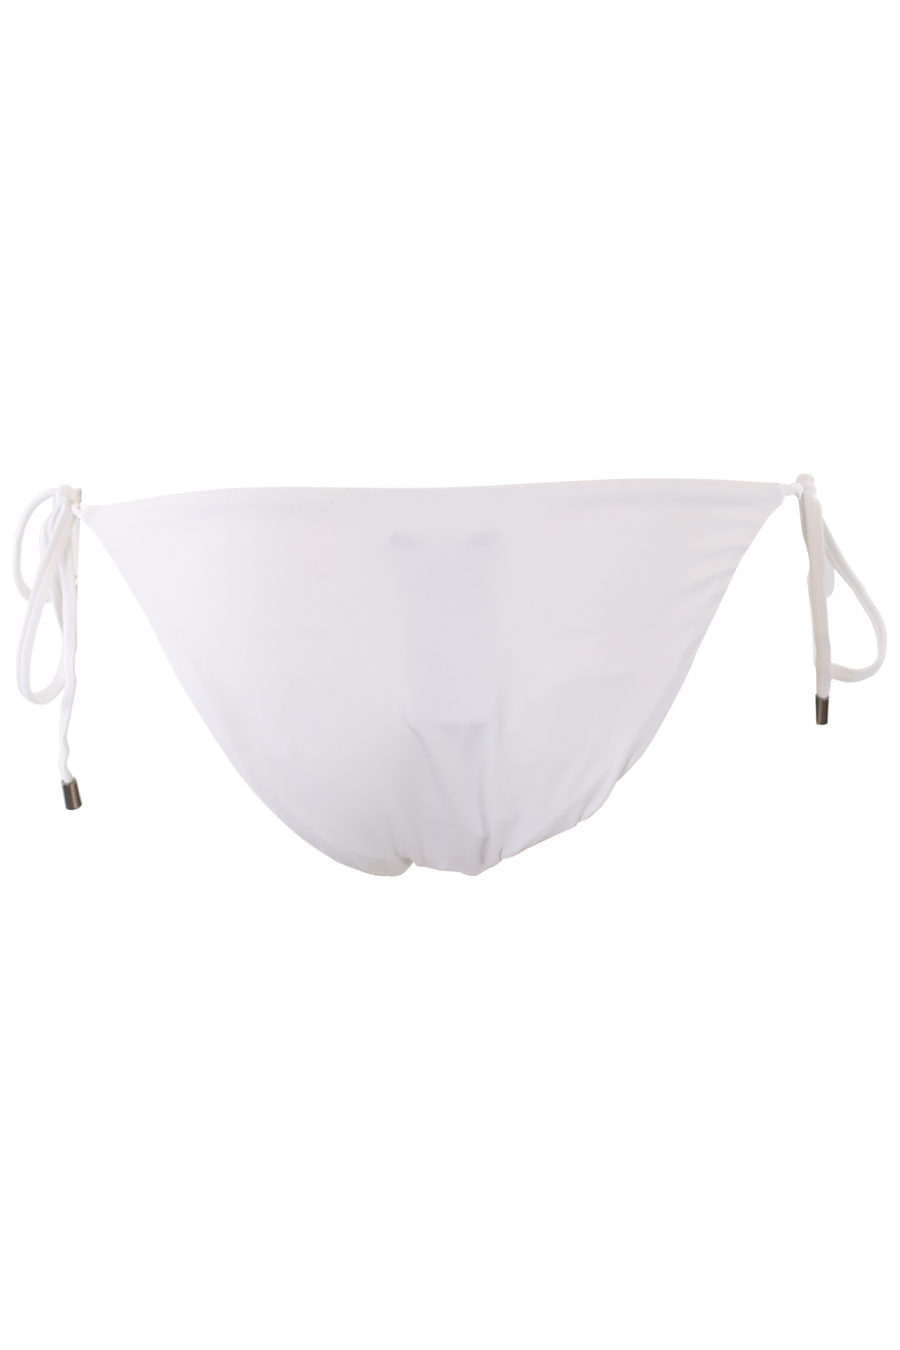 Bikini bottoms in white with lacing and small metal lettering logo - IMG 1326